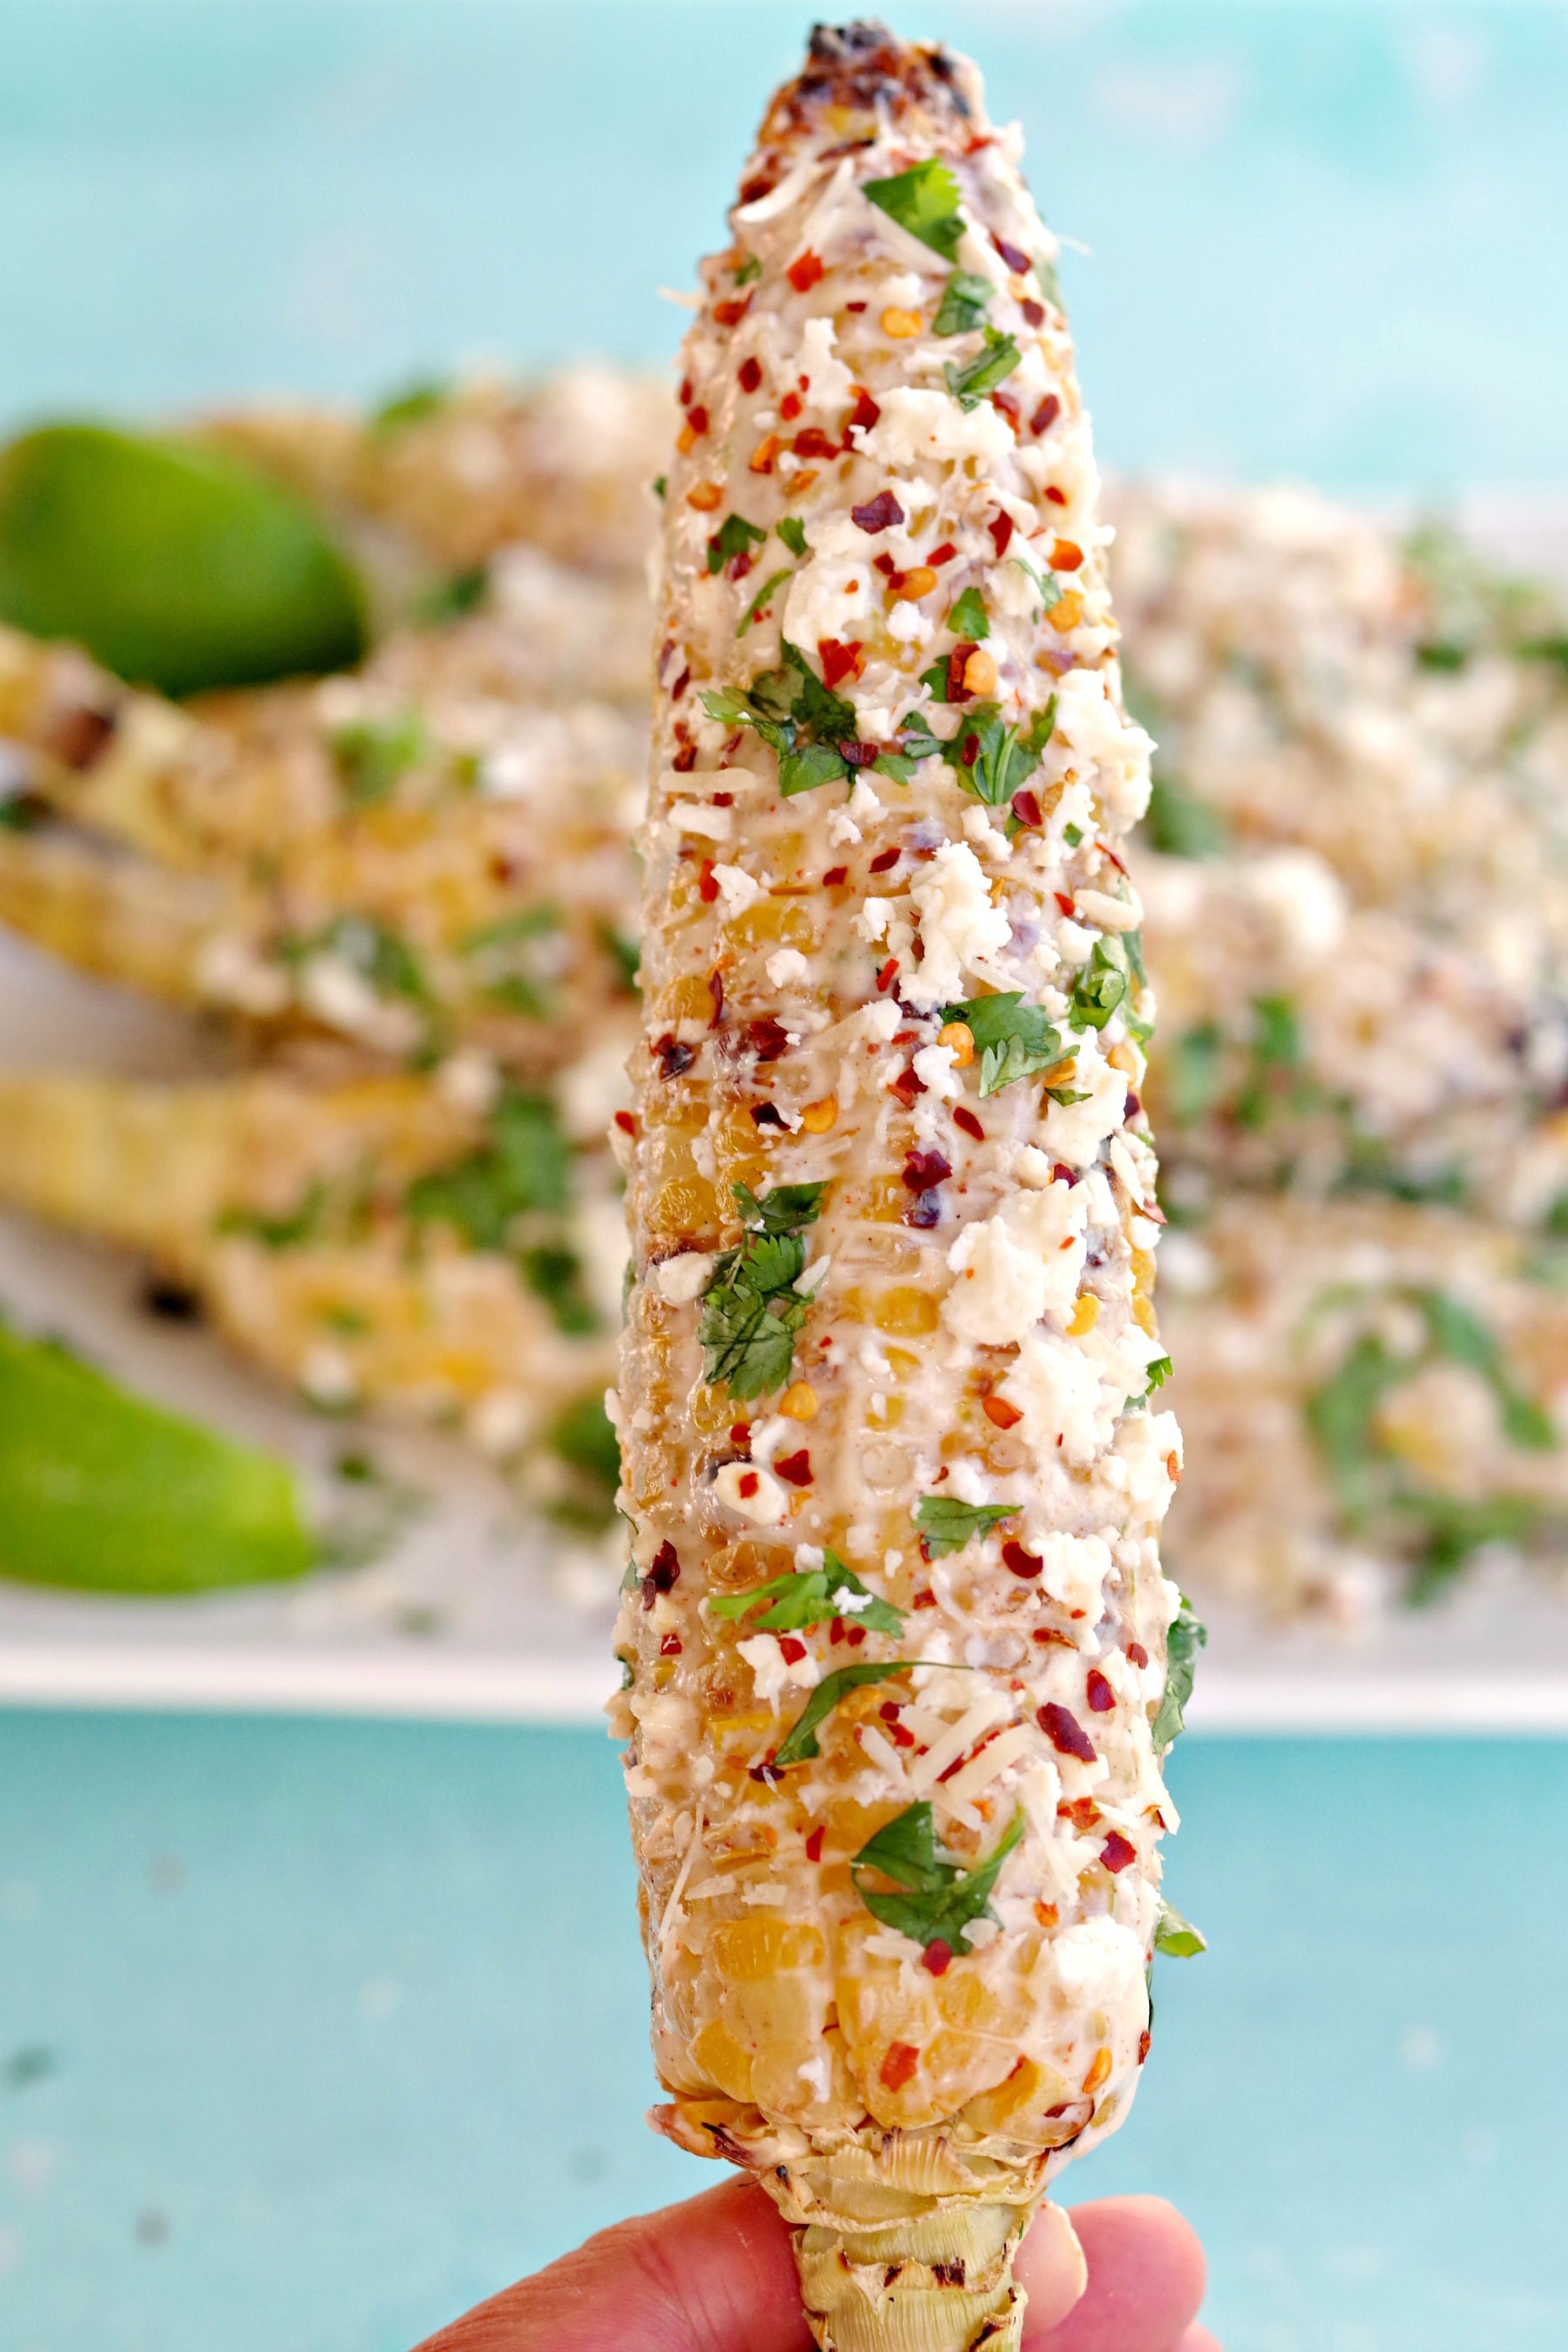 Grilled Mexican Street Corn being held up